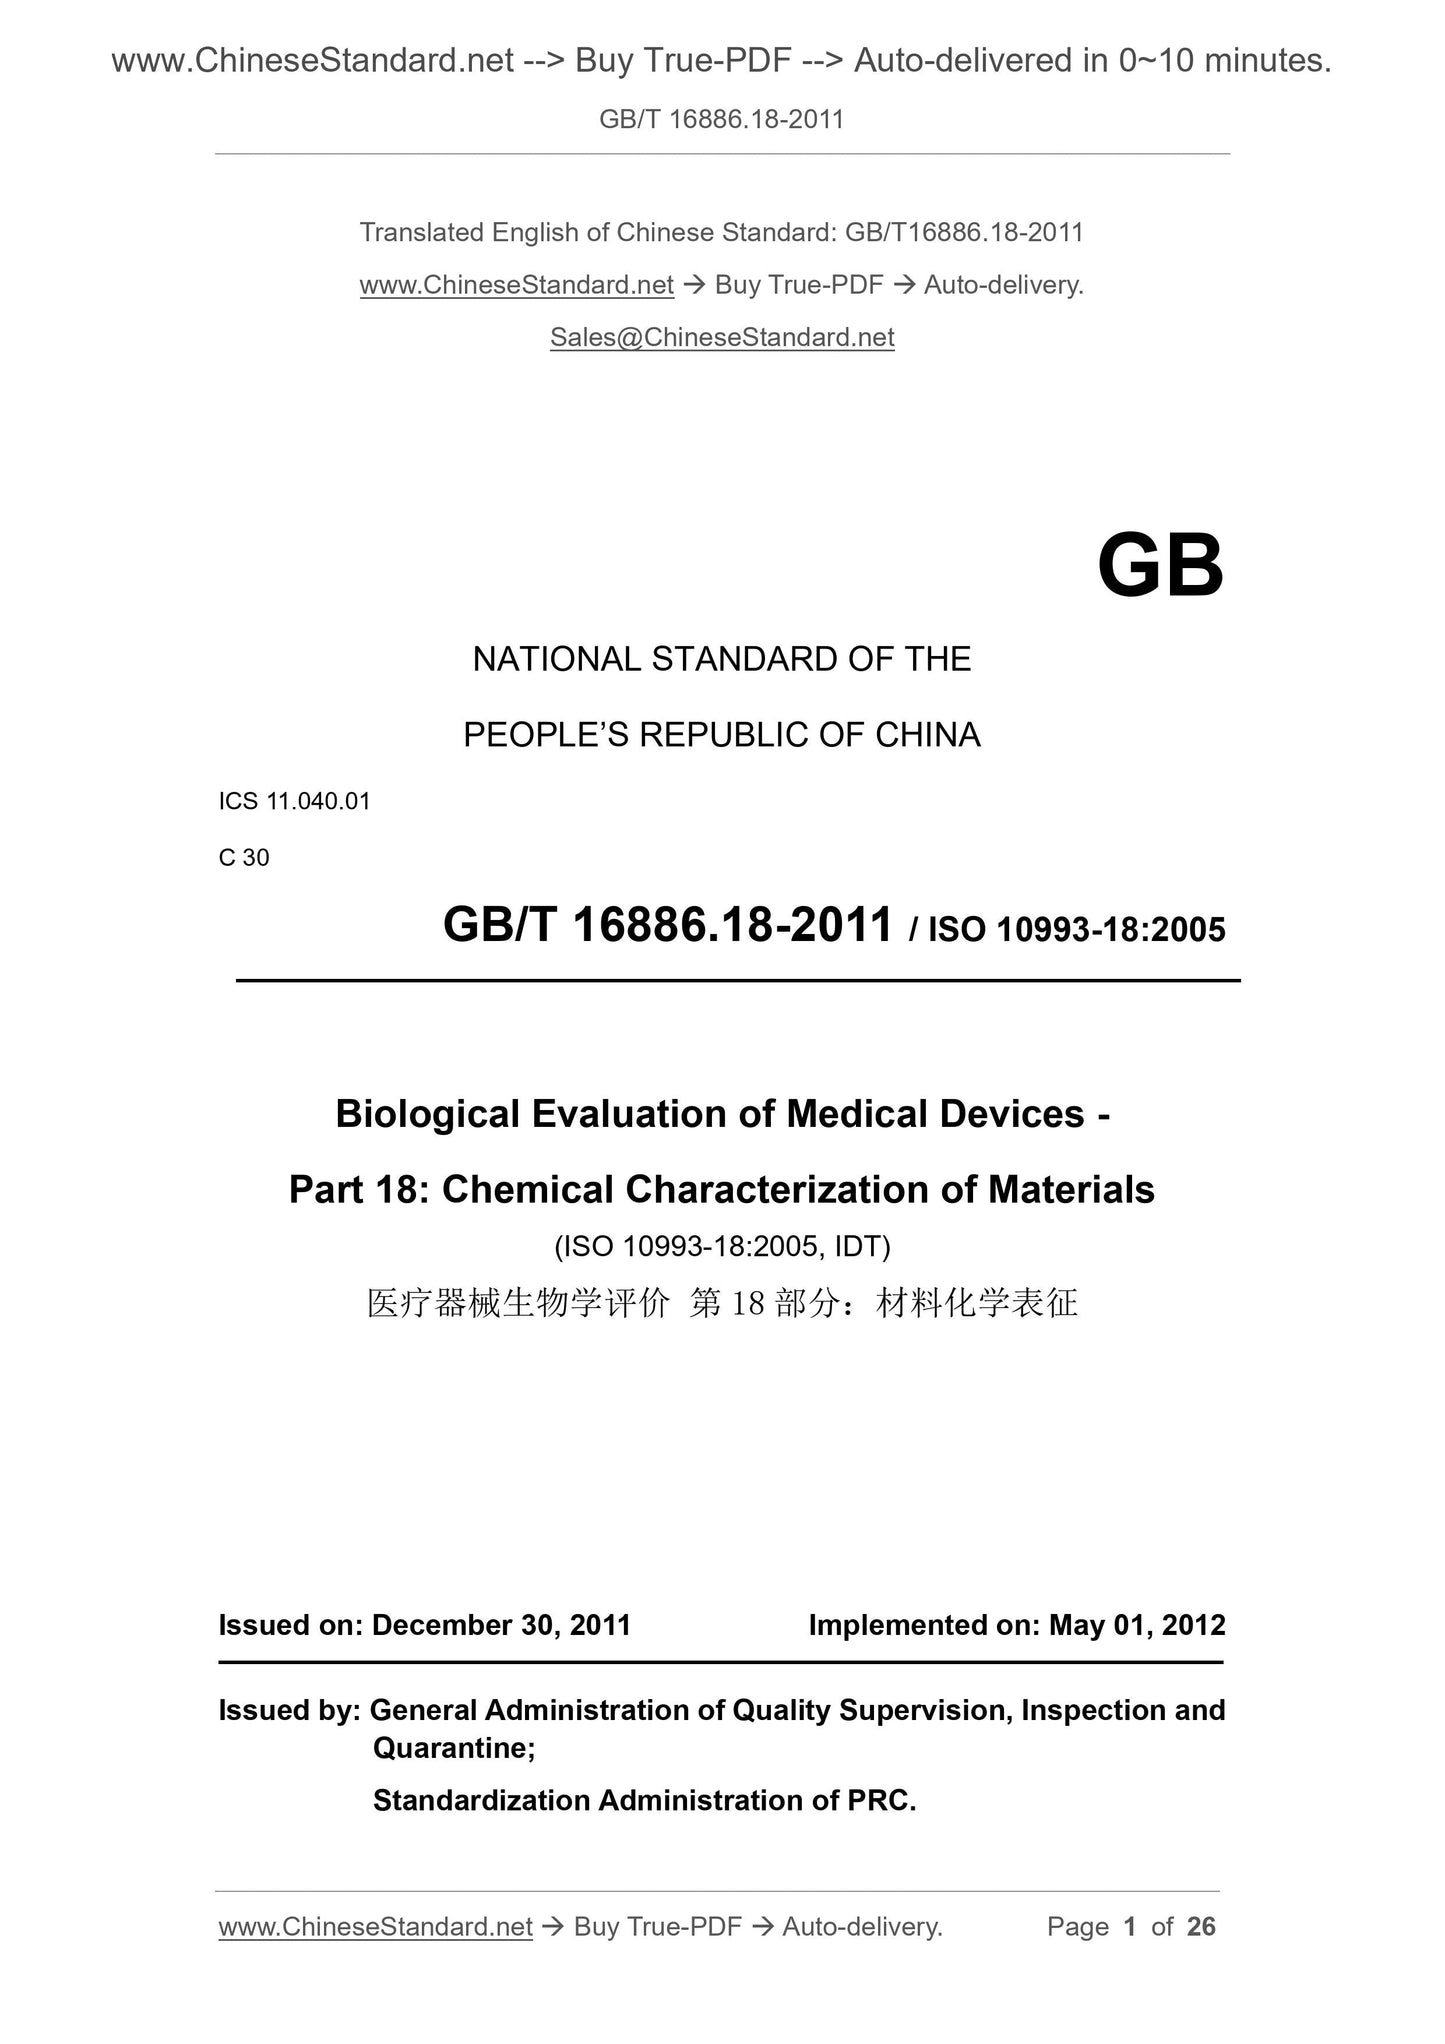 GB/T 16886.18-2011 Page 1